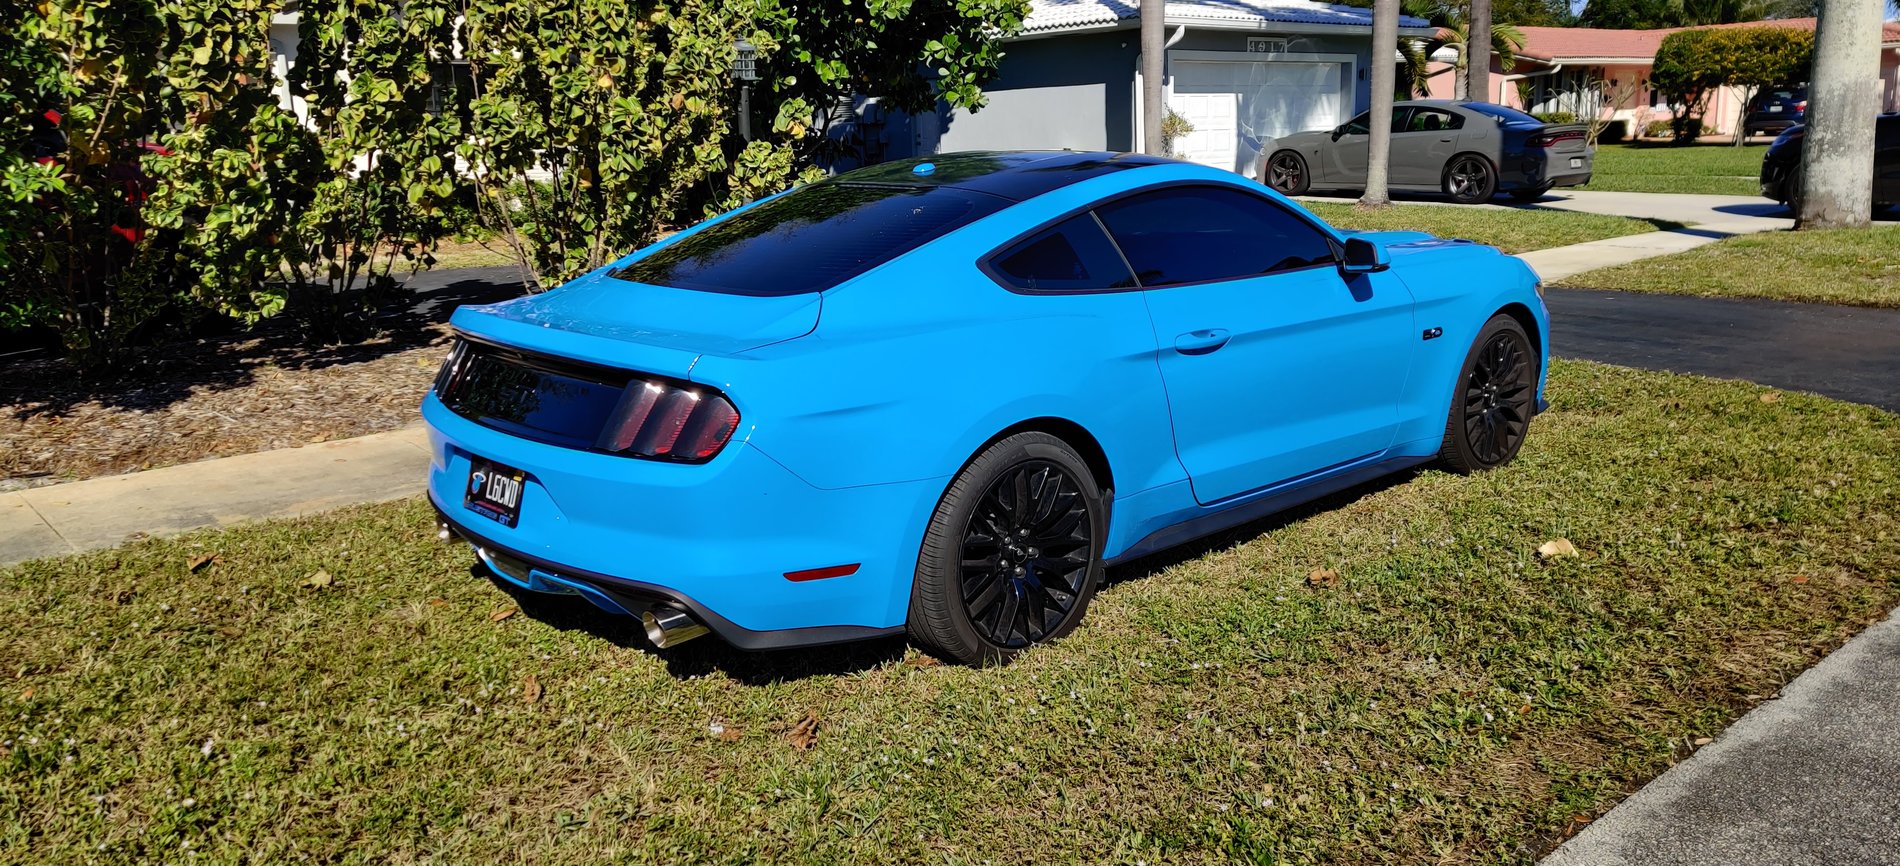 2015 Mustang Gt For Sale In Fl